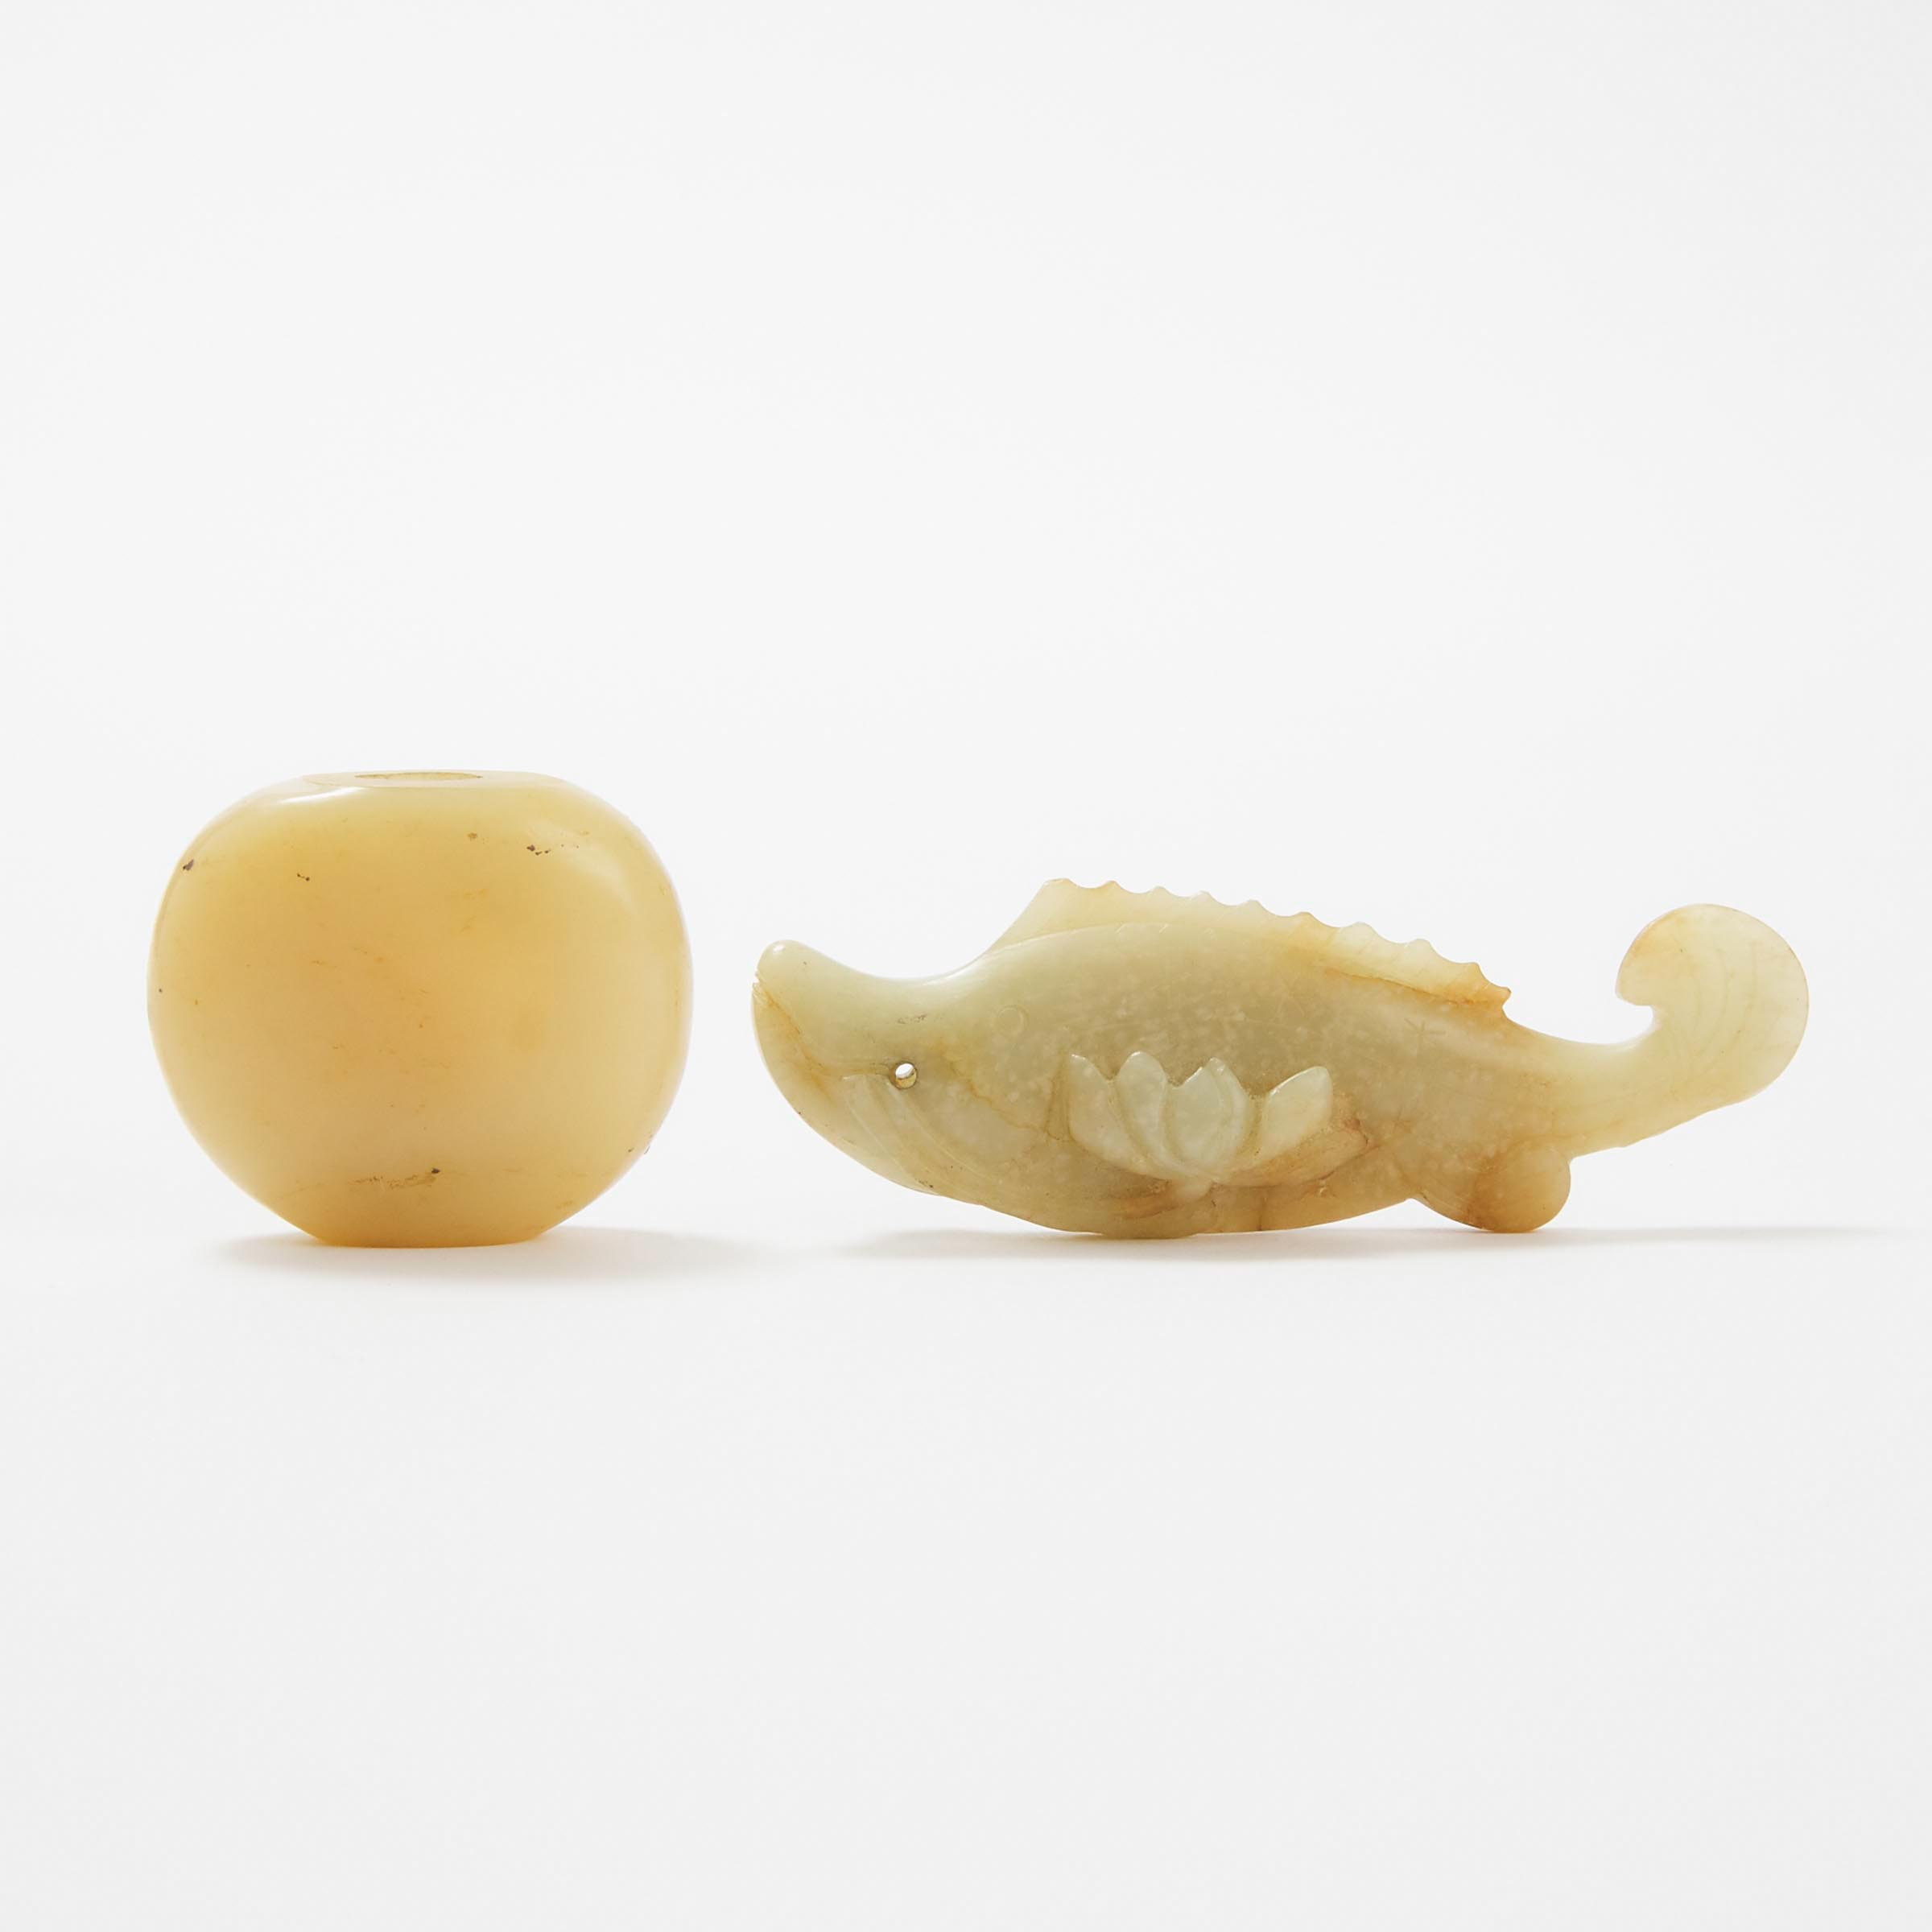 A Mottled Jade Carving of a Fish, Ming Dynasty, Together With a Snuff Bottle, Early Qing Dynasty